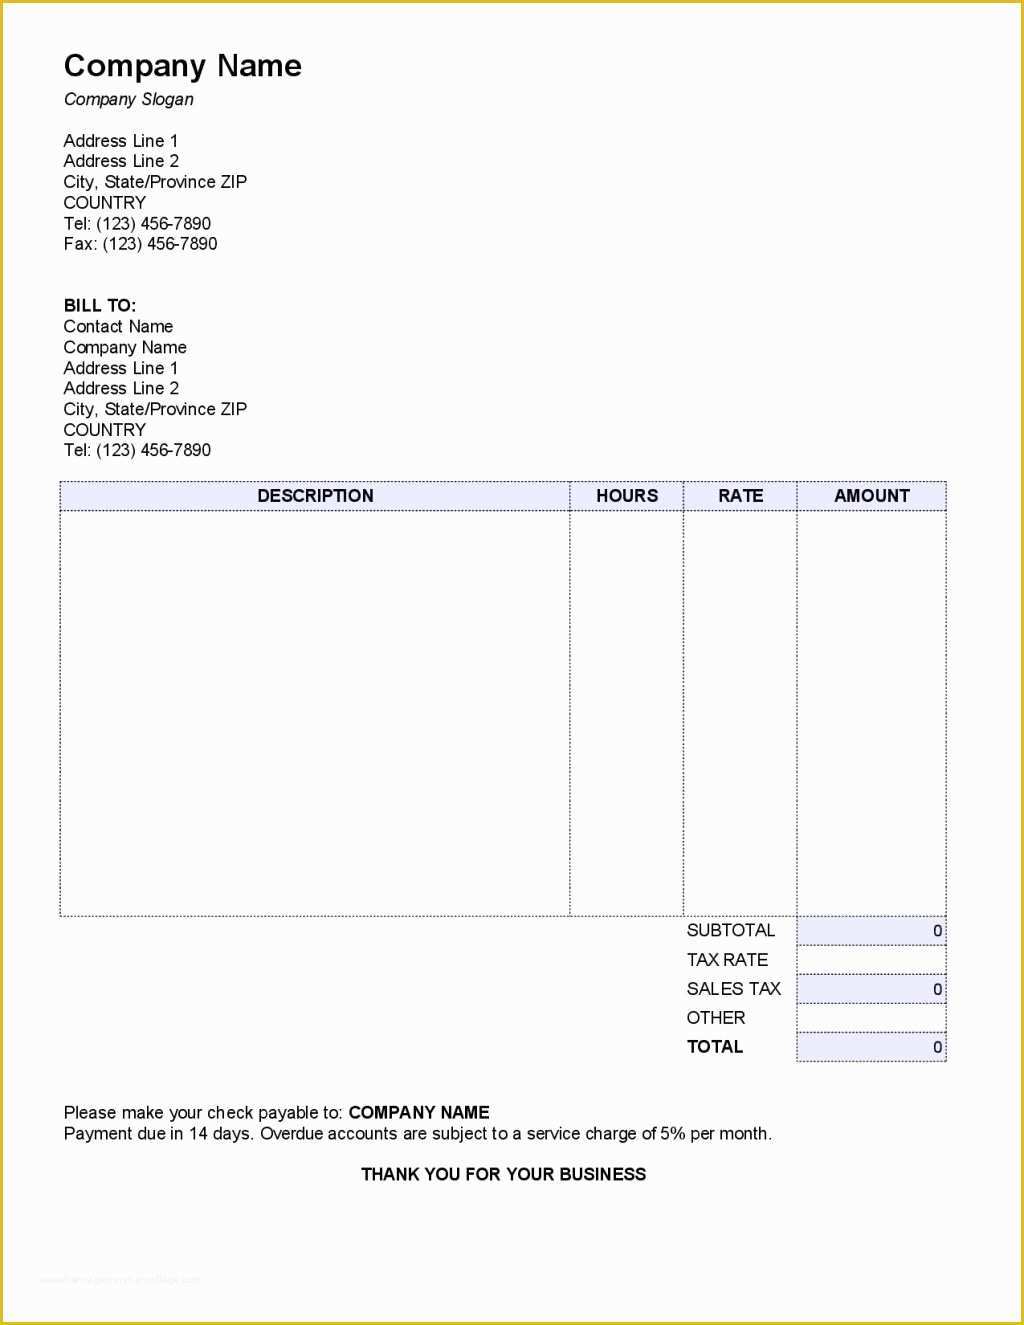 Free Personal Invoice Template Of Sample Invoices for Small Business Invoice Template Ideas